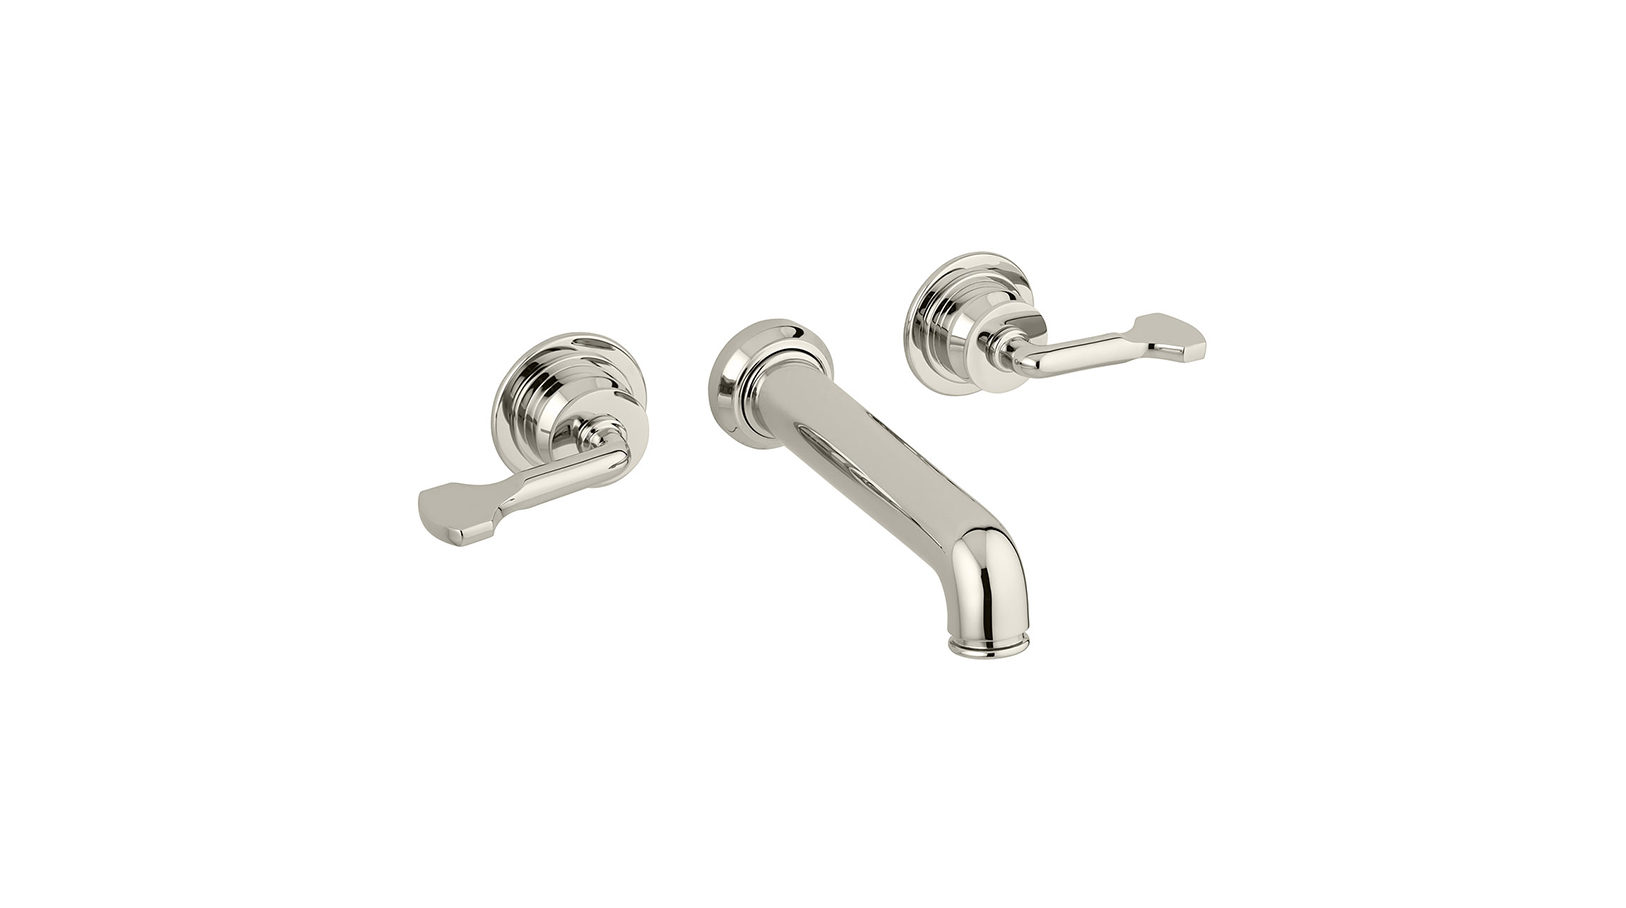 The Leawood Wall Mounted 3-Hole Bath Mixer